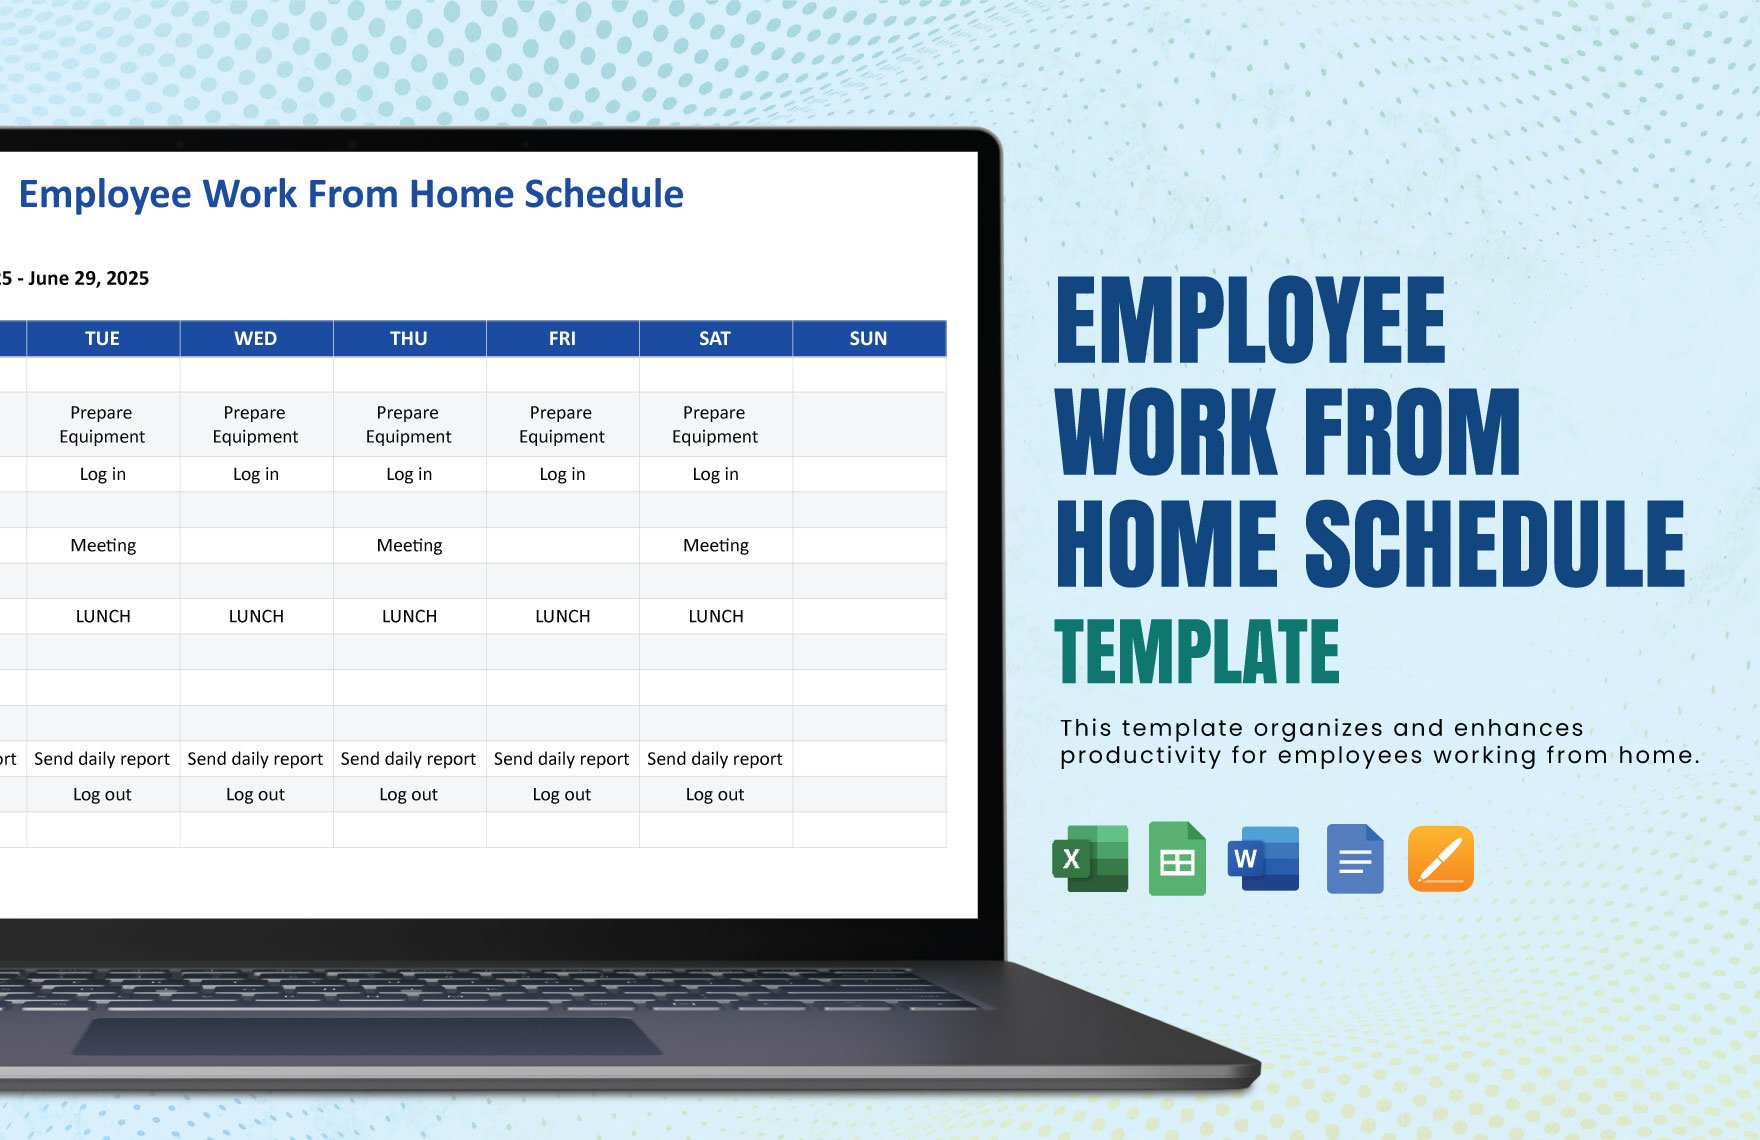 Employee Work From Home Schedule Template